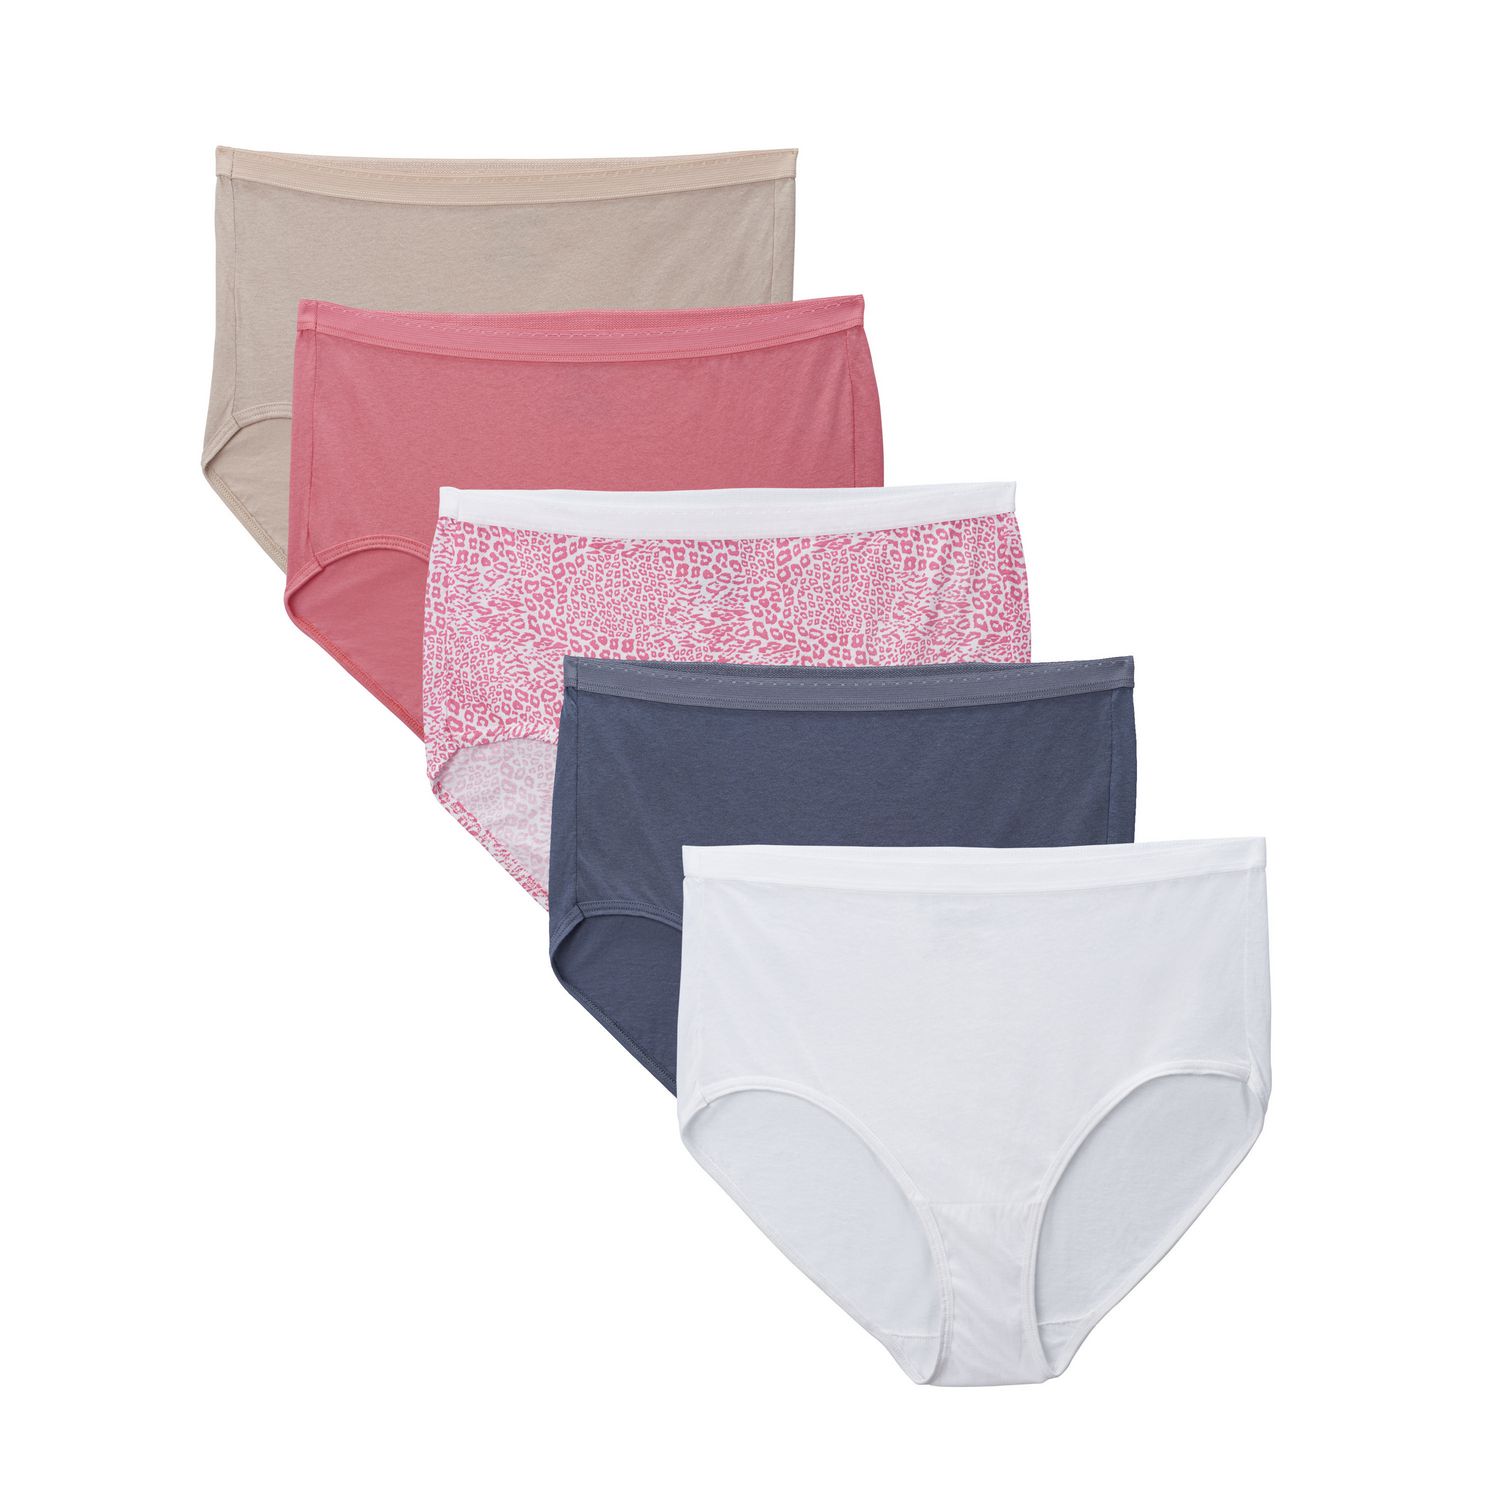 Fruit of the Loom Women's Cotton Brief, 5-Pack | Walmart Canada